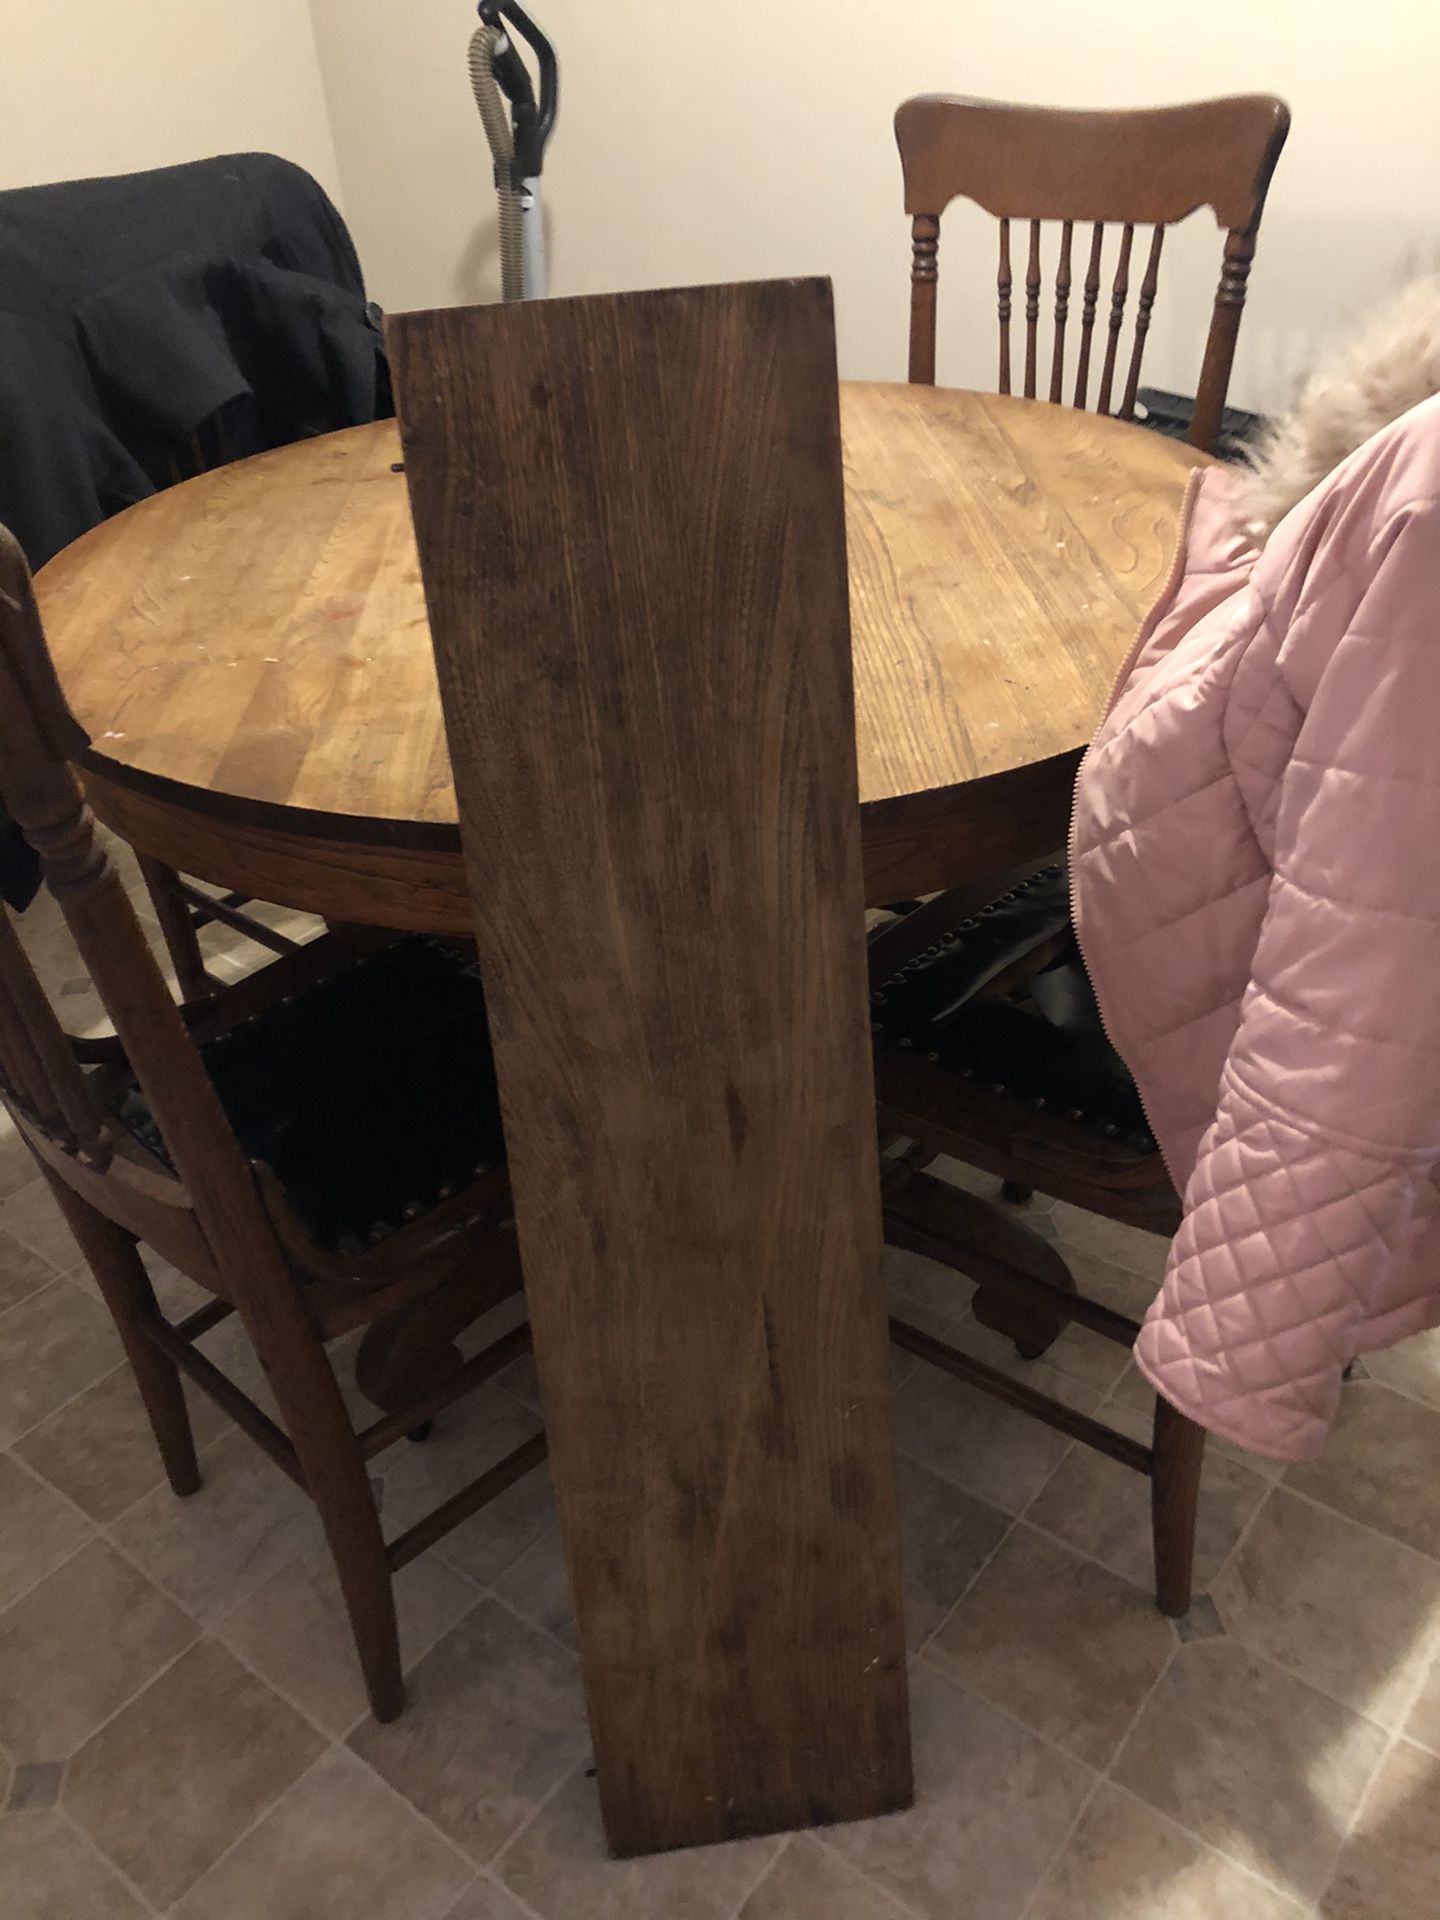 1900 table with 4 chairs